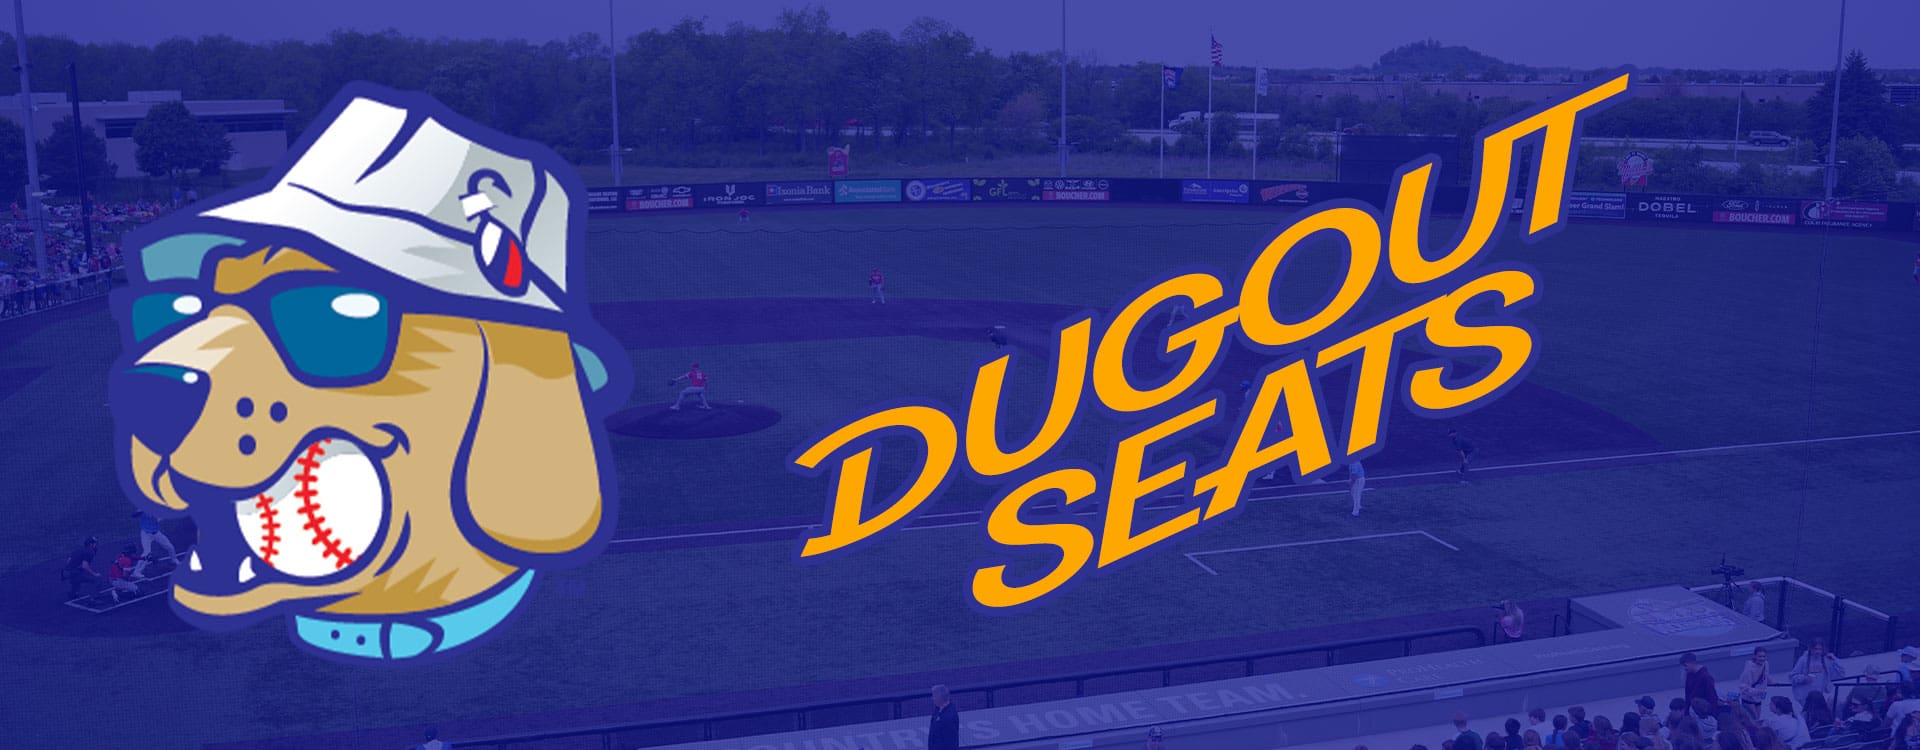 Dugout Seat season ticket packages